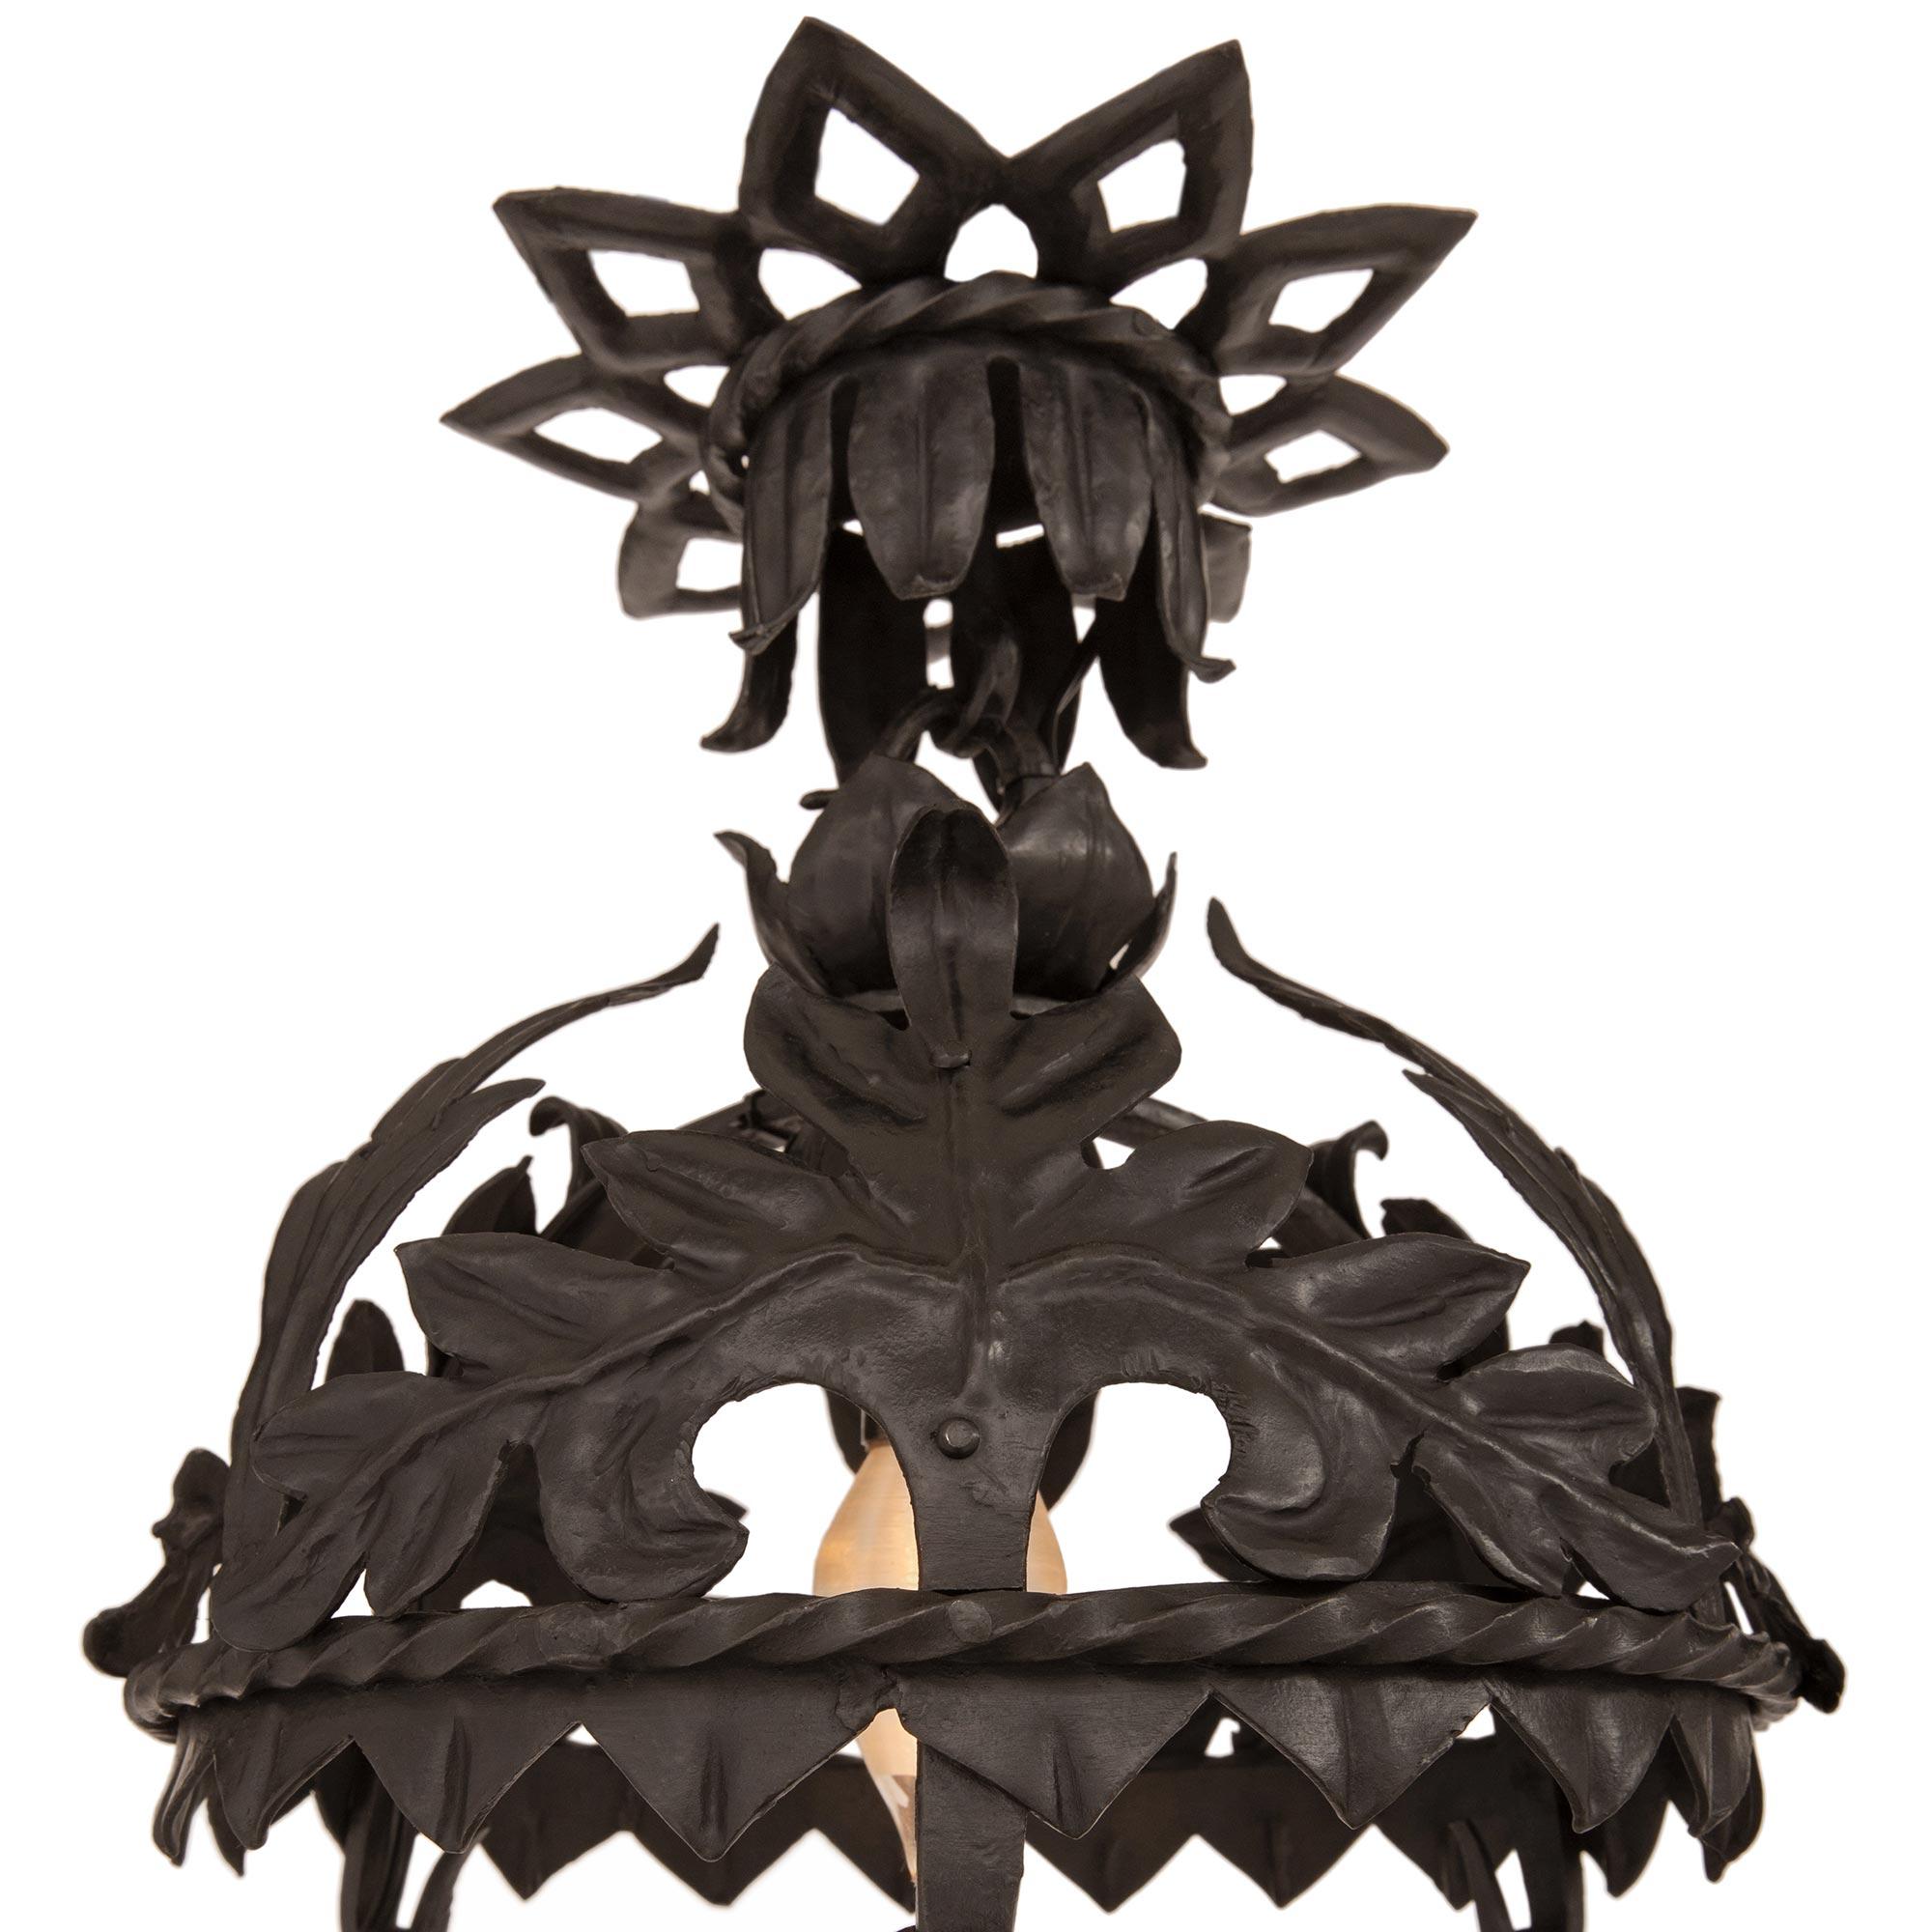 French 19th Century Renaissance St. Wrought Iron Chandelier In Good Condition For Sale In West Palm Beach, FL